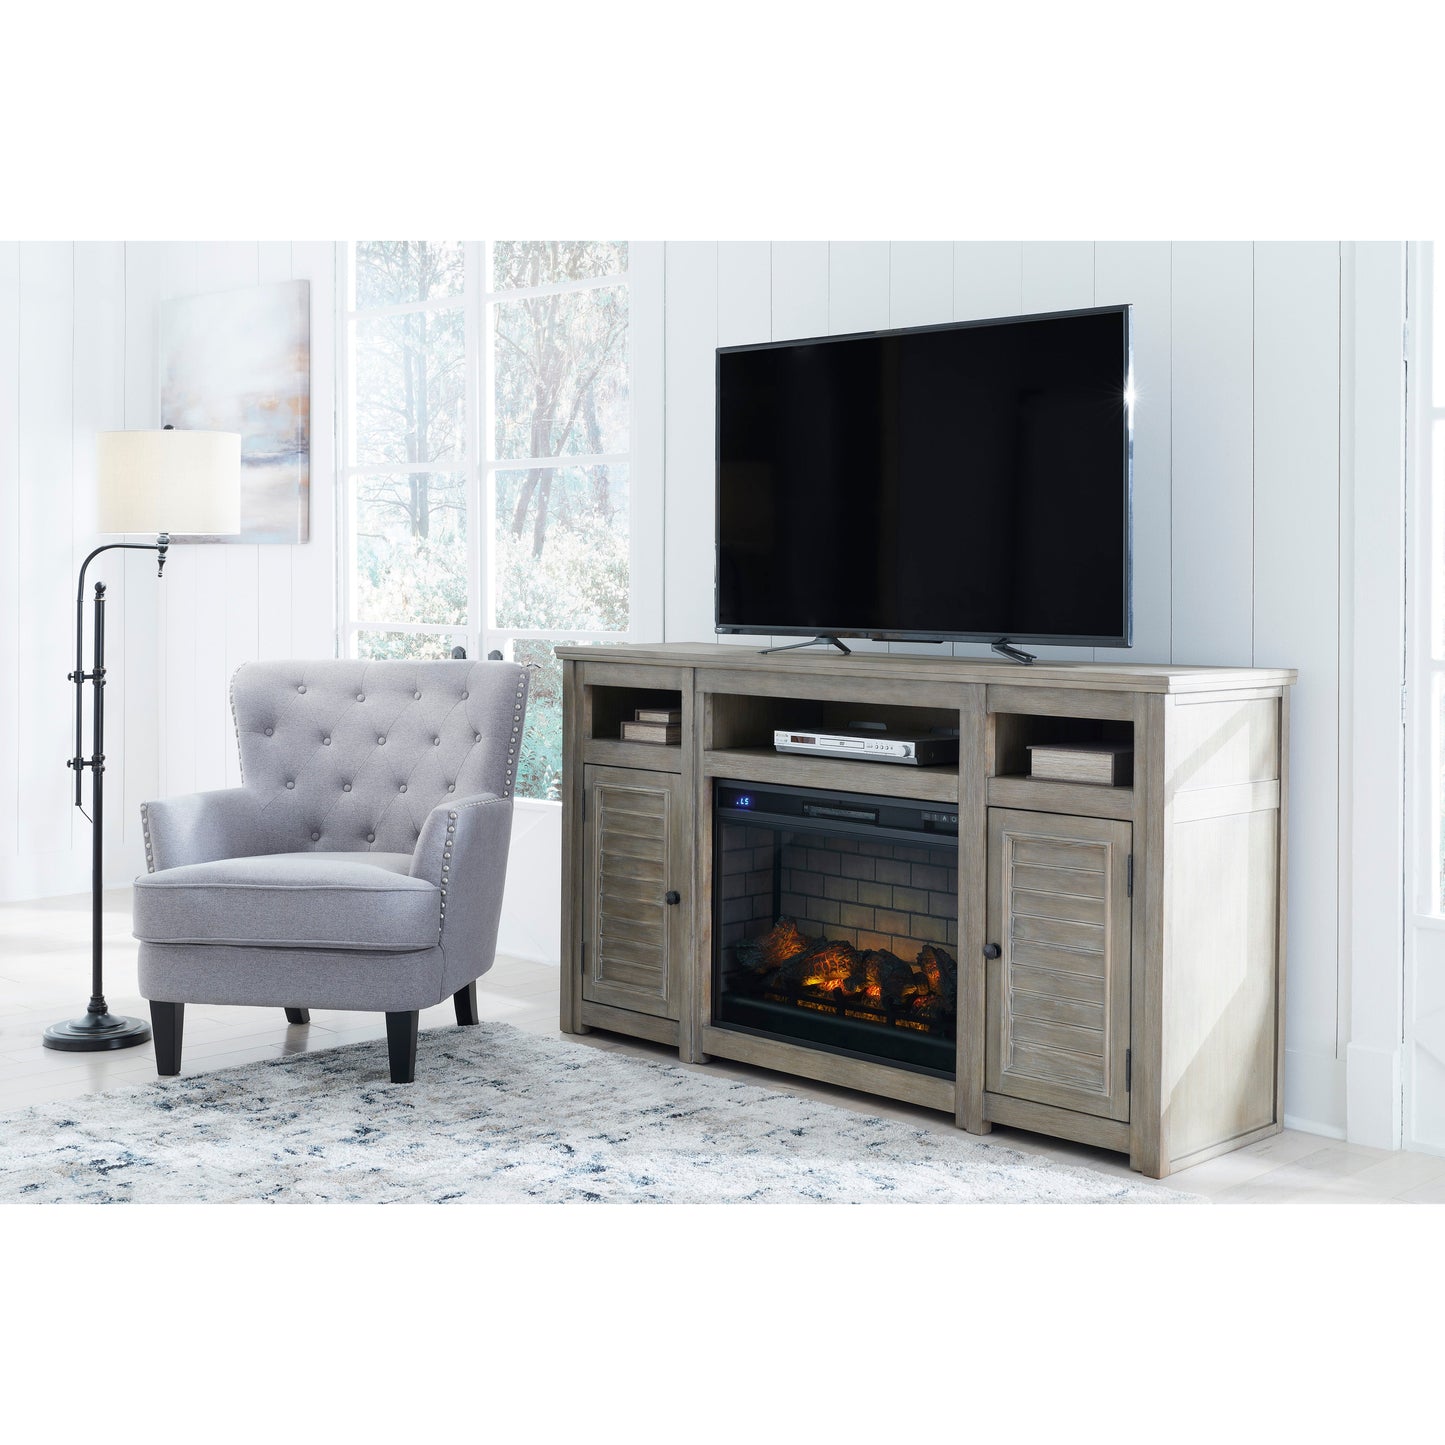 MORESHIRE 72" TV STAND W/ ELECTRIC FIREPLACE- BISQUE